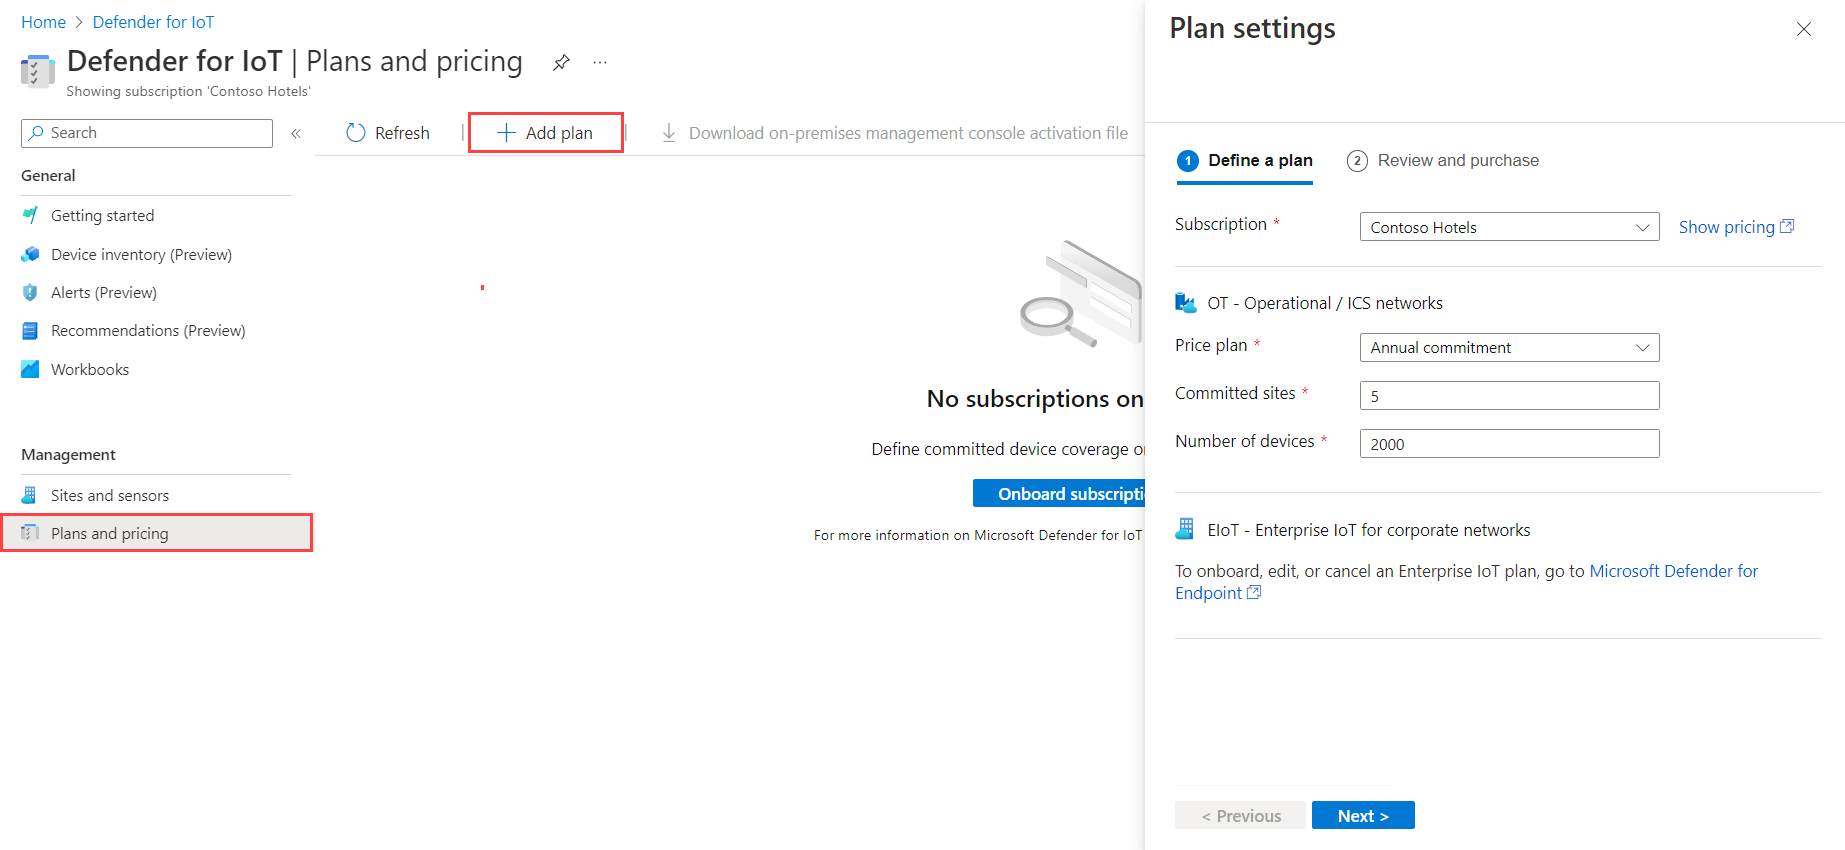 Screenshot of the plan settings pane to add or edit a plan for OT networks.